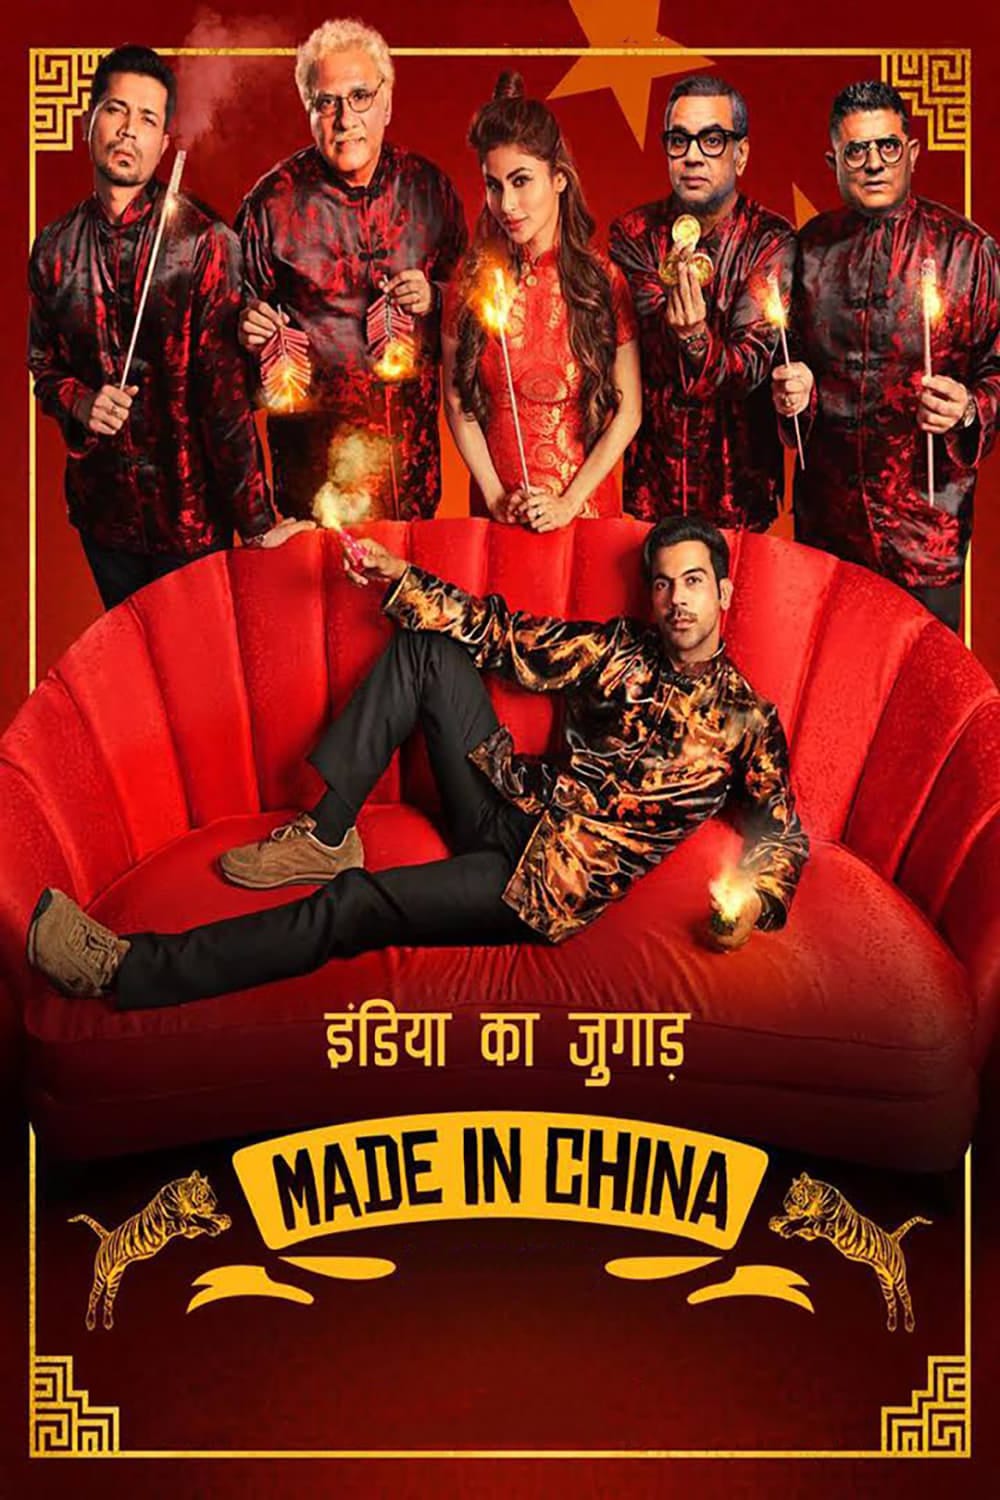 Poster for the movie "Made In China"